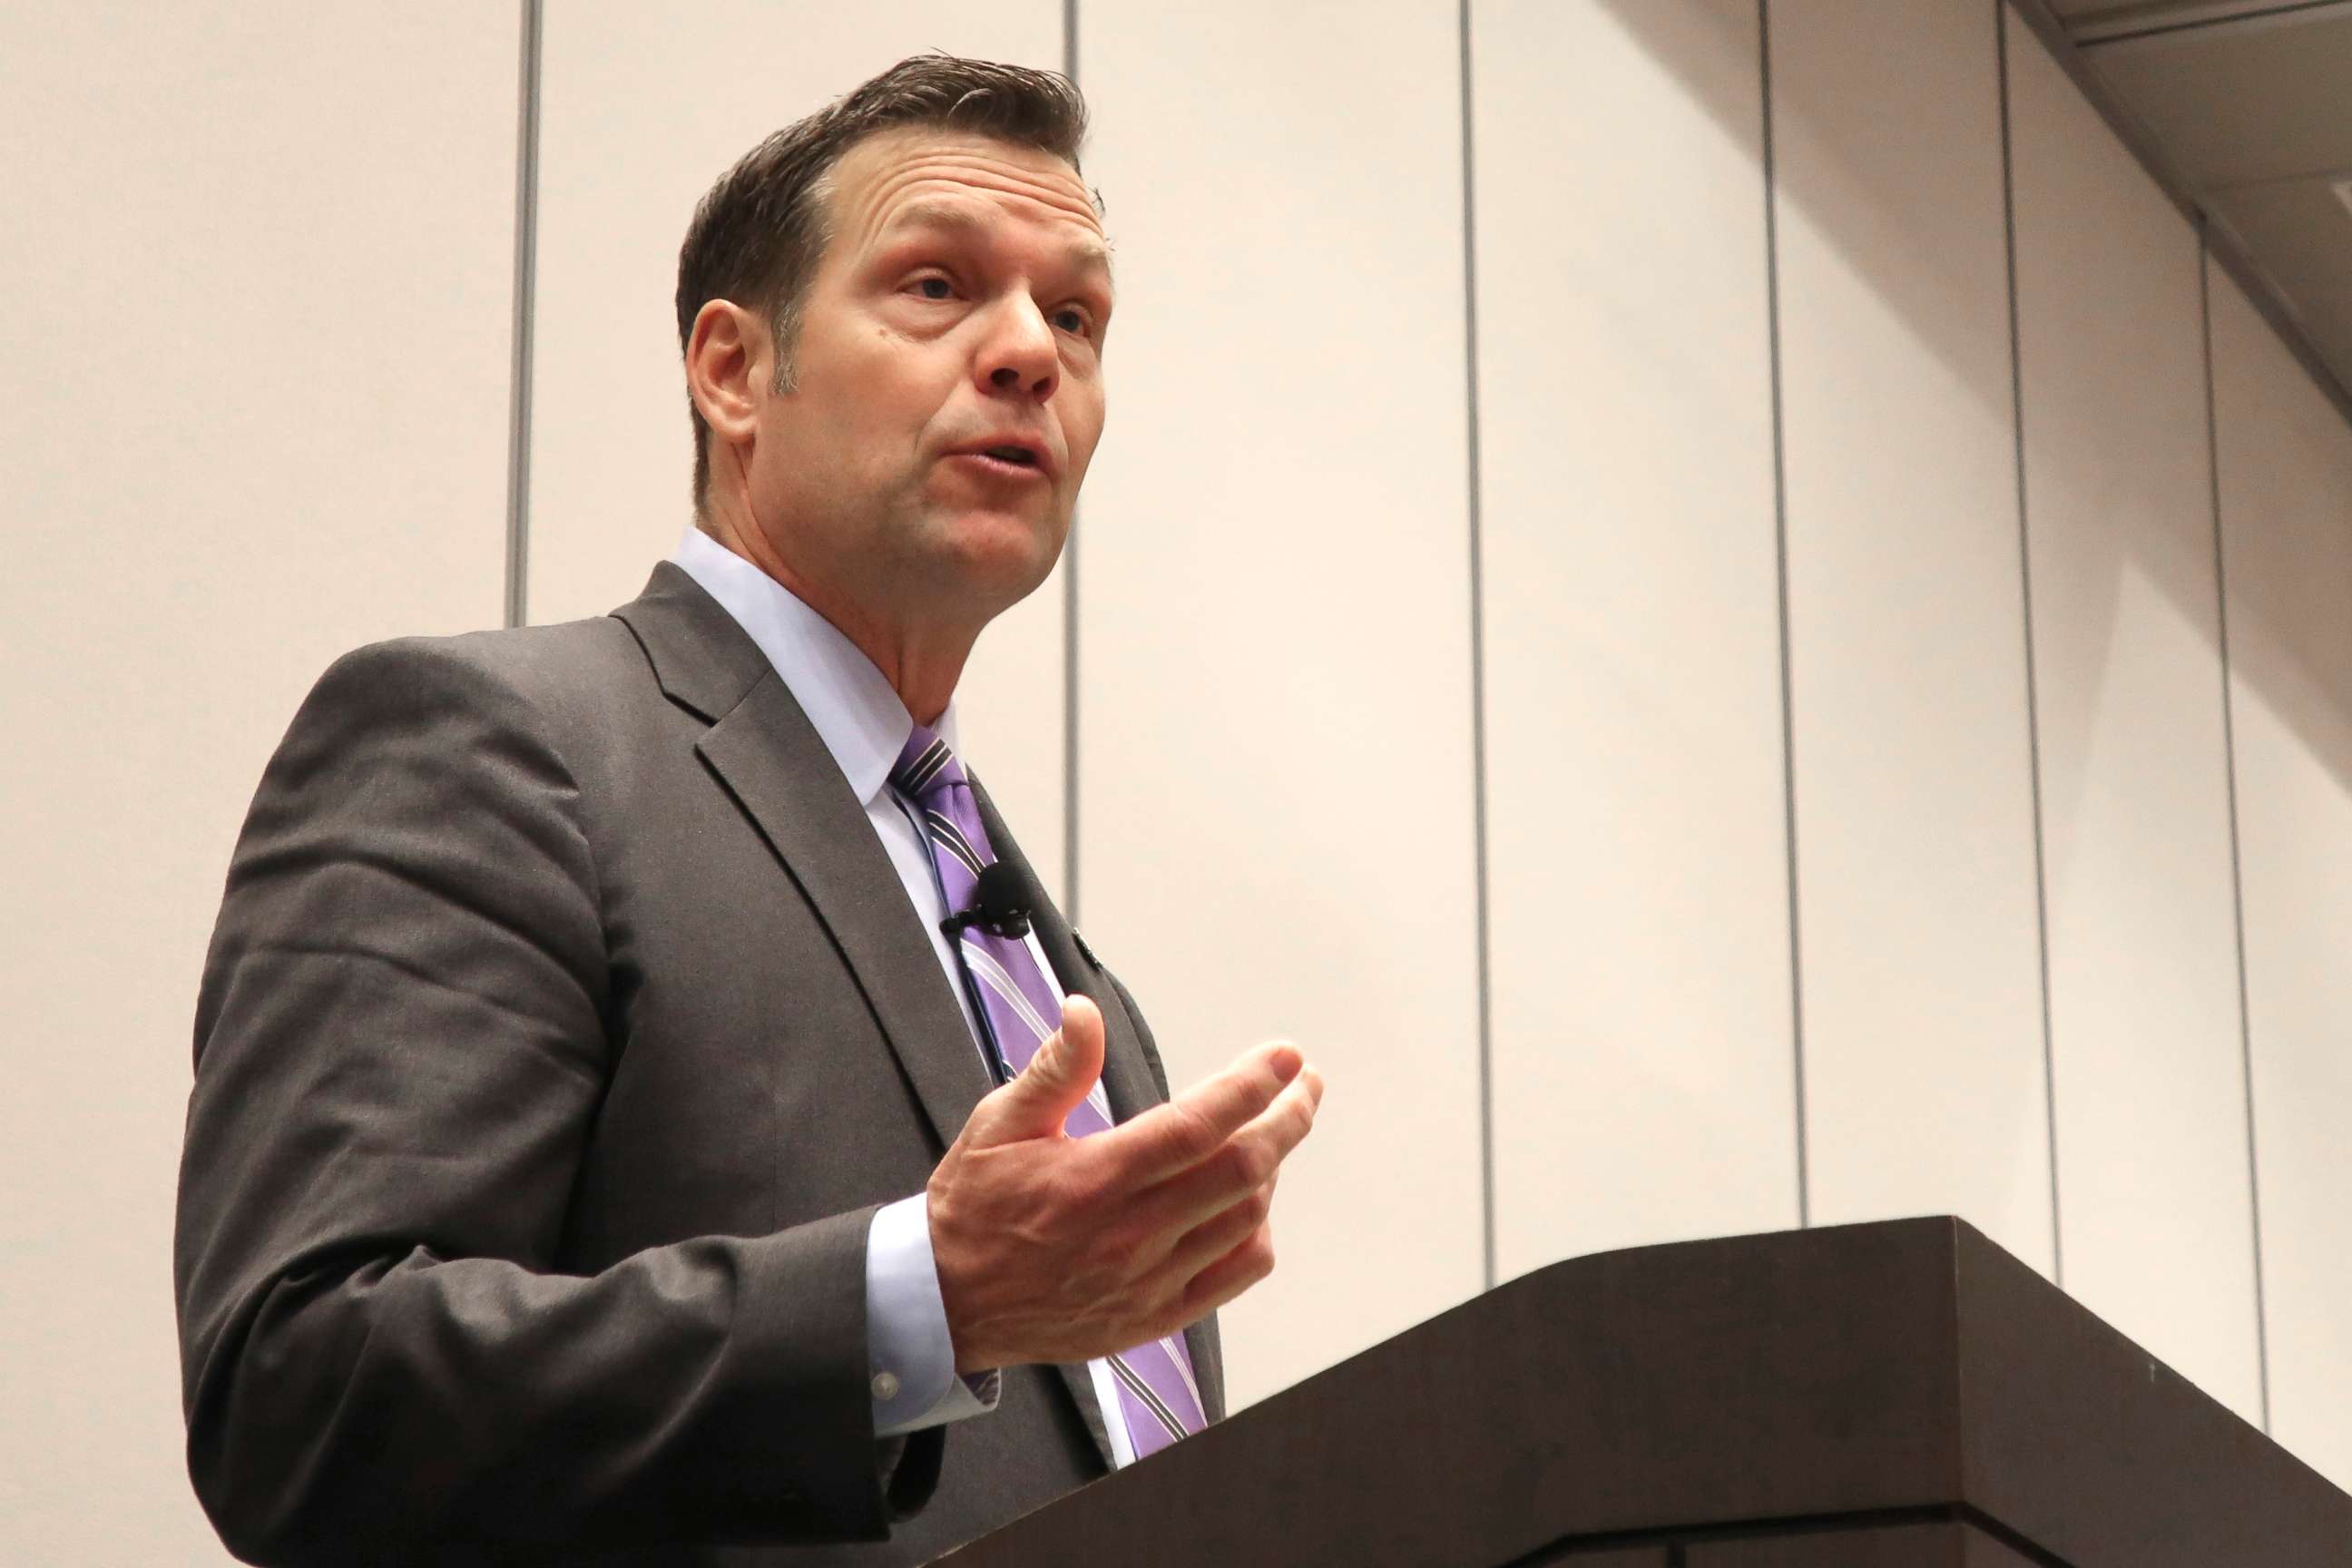 PHOTO: Former Kansas Secretary of State Kris Kobach, a candidate for the U.S. Senate, answers a question during a debate in Olathe, Kan., Feb 1, 2020.